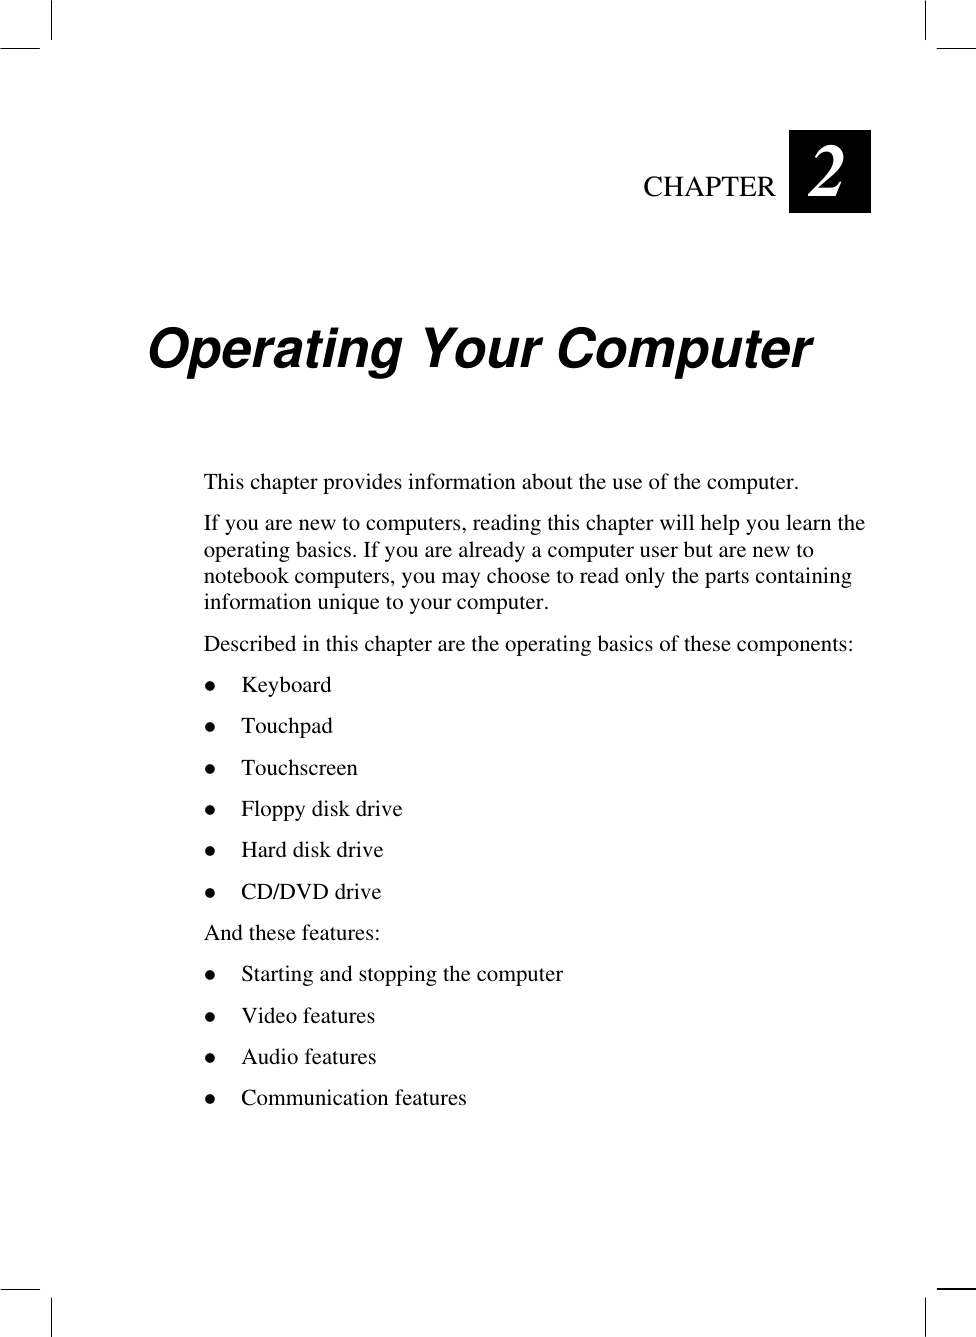   CHAPTER  2 Operating Your Computer This chapter provides information about the use of the computer. If you are new to computers, reading this chapter will help you learn the operating basics. If you are already a computer user but are new to notebook computers, you may choose to read only the parts containing information unique to your computer. Described in this chapter are the operating basics of these components:   Keyboard   Touchpad   Touchscreen   Floppy disk drive   Hard disk drive   CD/DVD drive And these features:   Starting and stopping the computer   Video features   Audio features   Communication features  